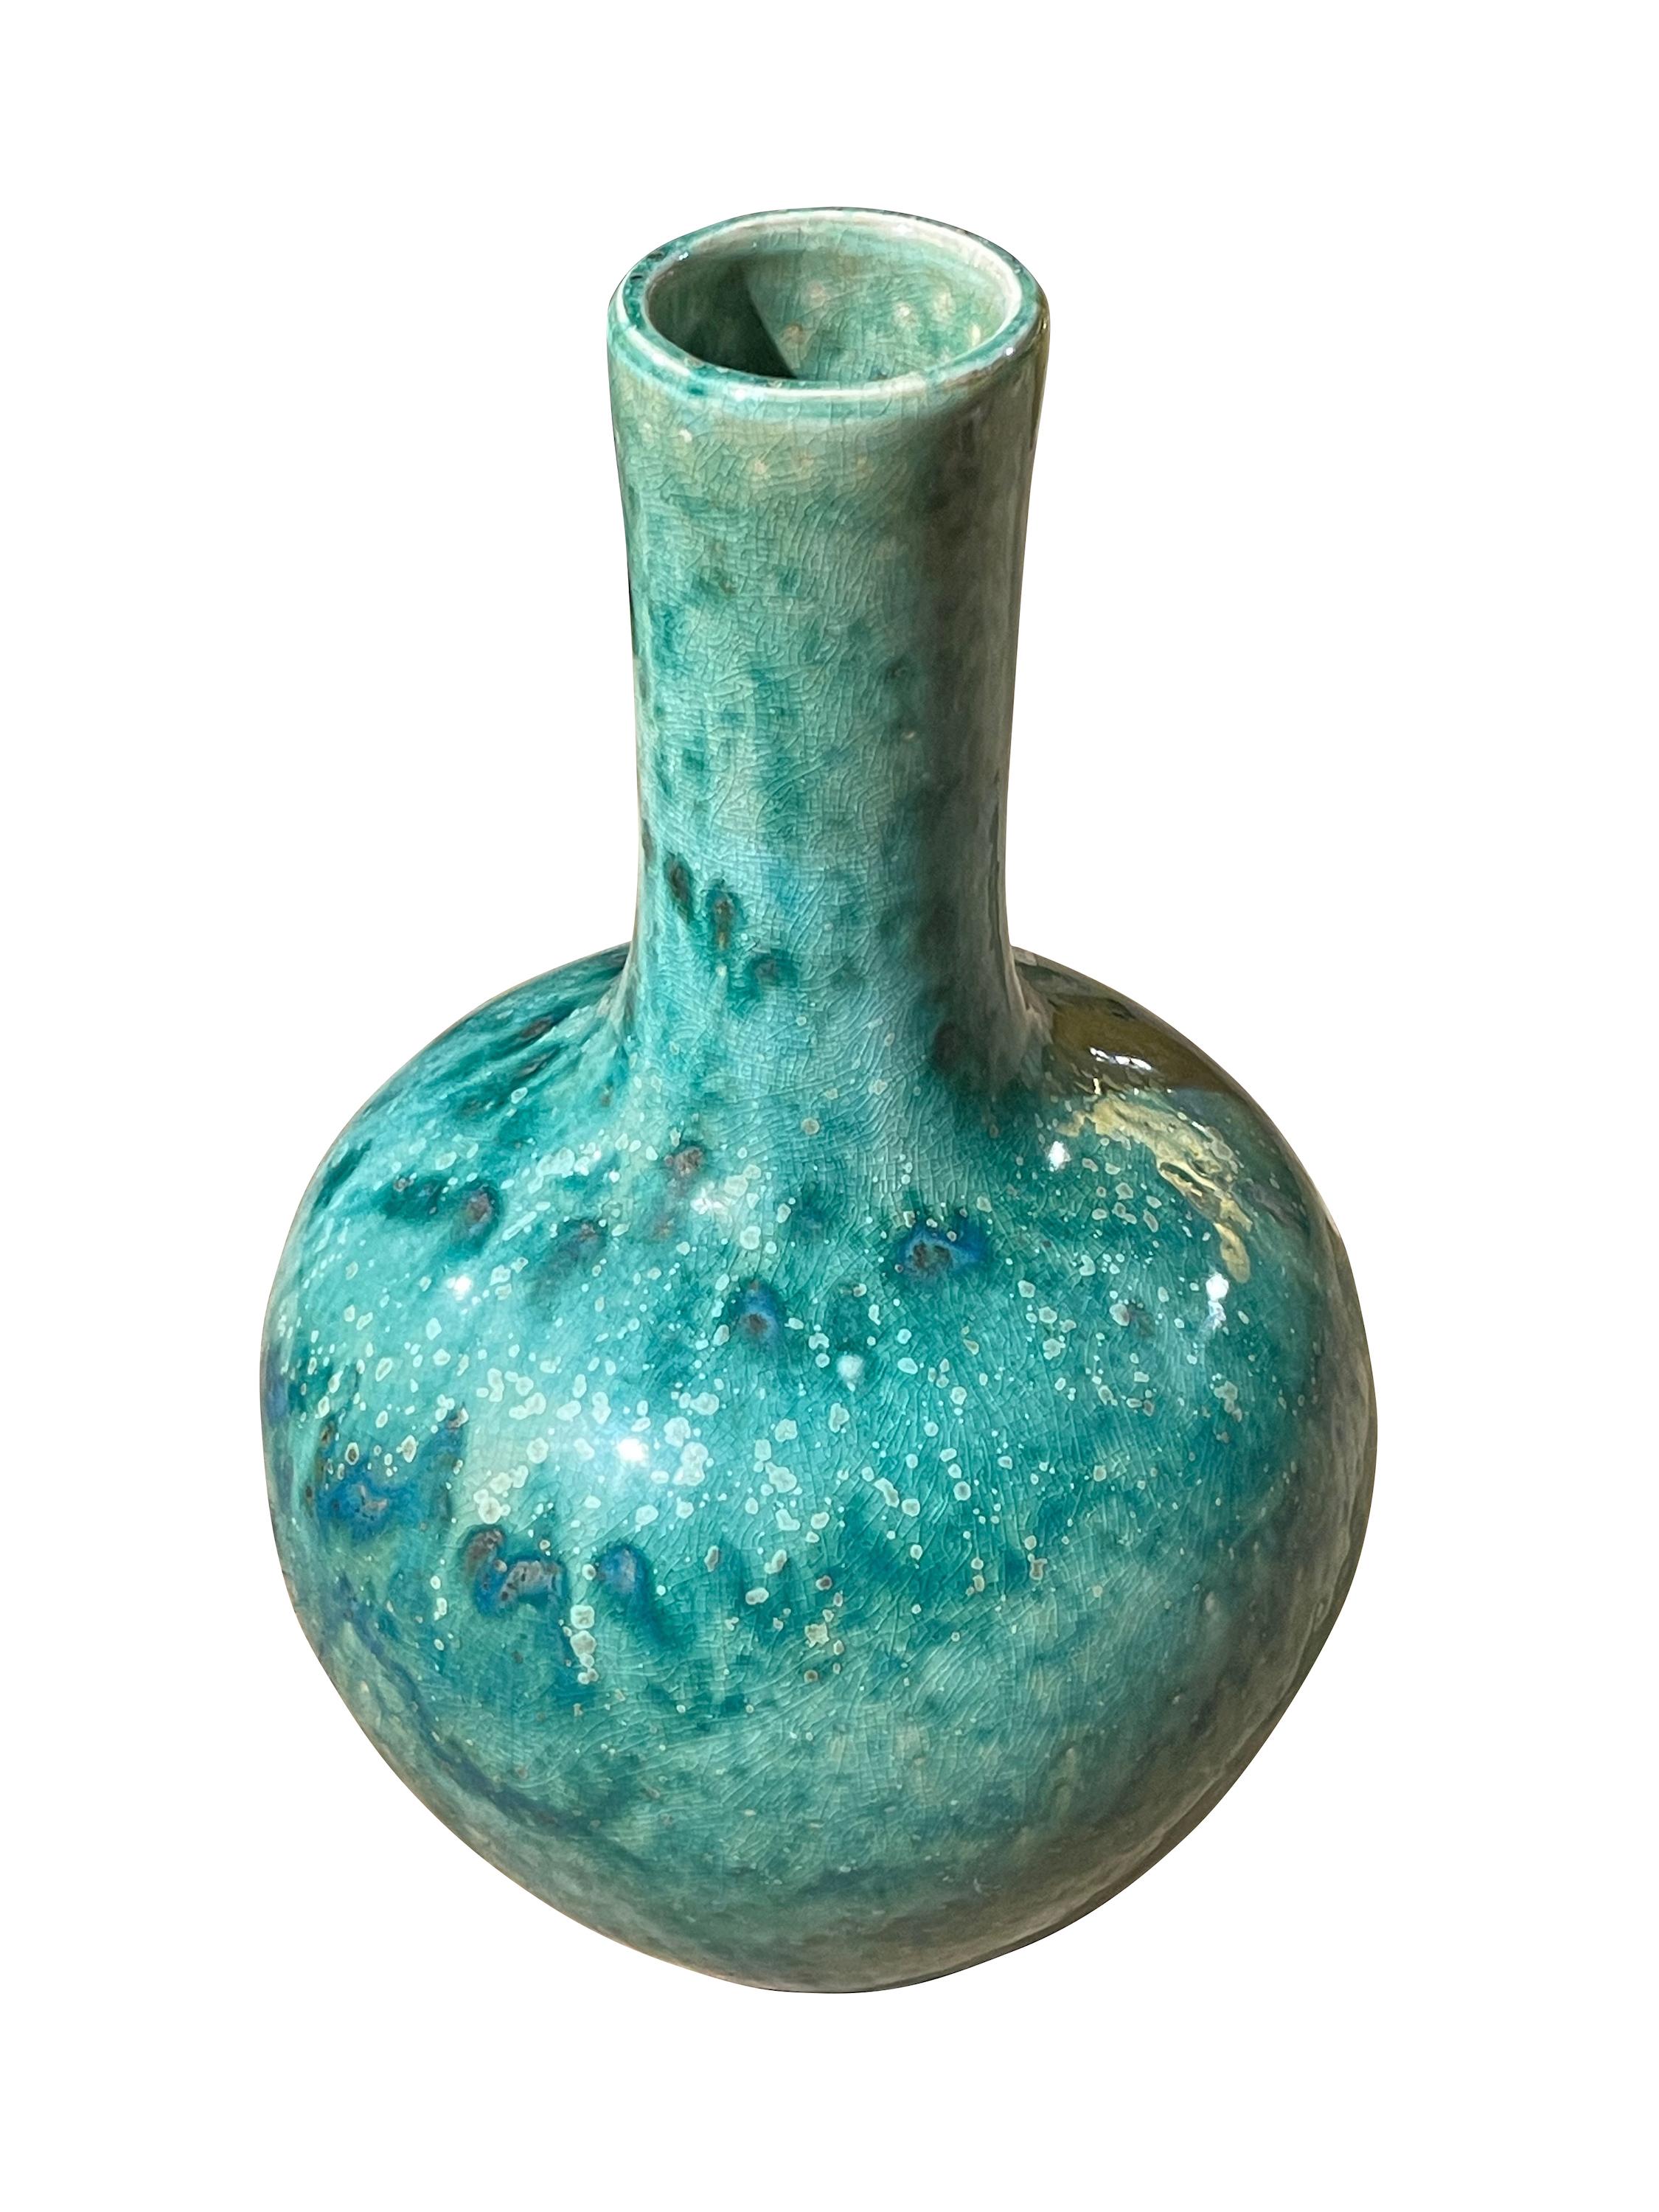 Contemporary Chinese mottled turquoise coloring with crackle glaze vase.
Funnel neck design.
From a large collection of different sizes and shapes.
